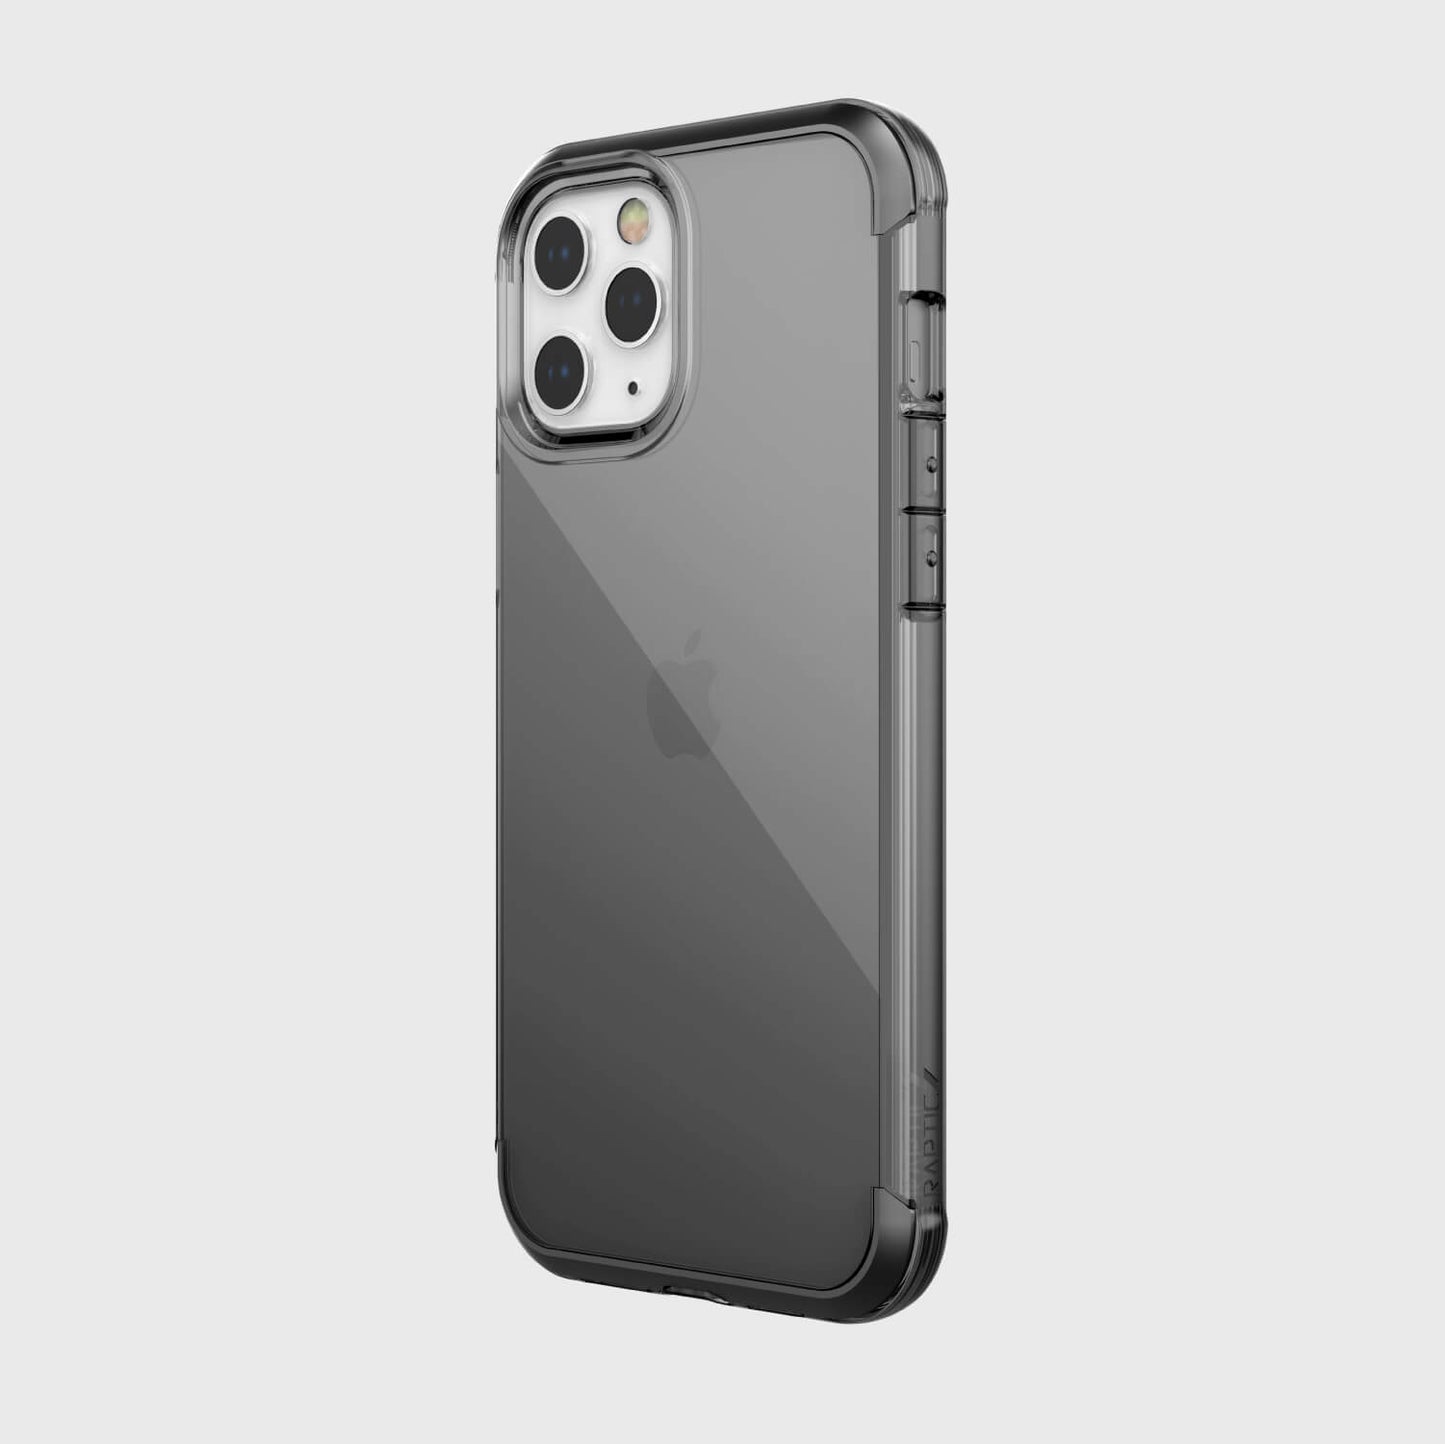 The back view of the Raptic iPhone 13 Case - AIR, featuring drop-proof and wireless charging compatibility.